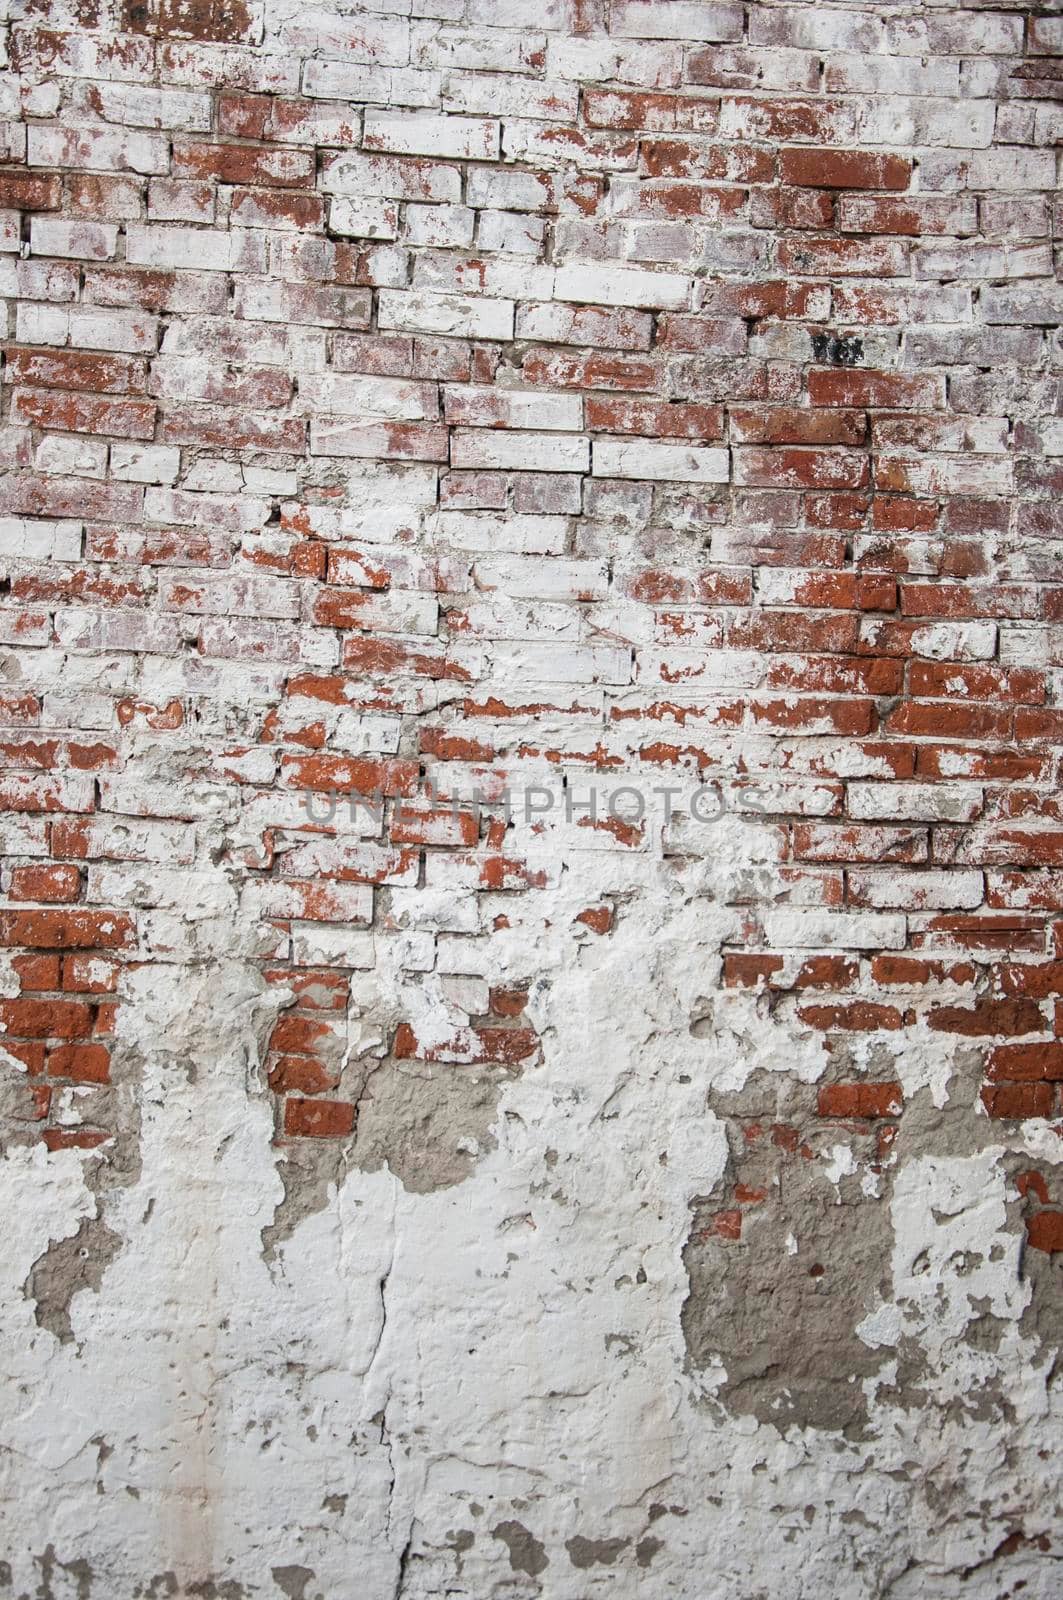 Empty old brick wall texture. Painted distressed wall surface. Grungy wide brickwall. Grunge red stonewall background. Shabby building facade with damaged plaster. Abstract web banner. Copy space.